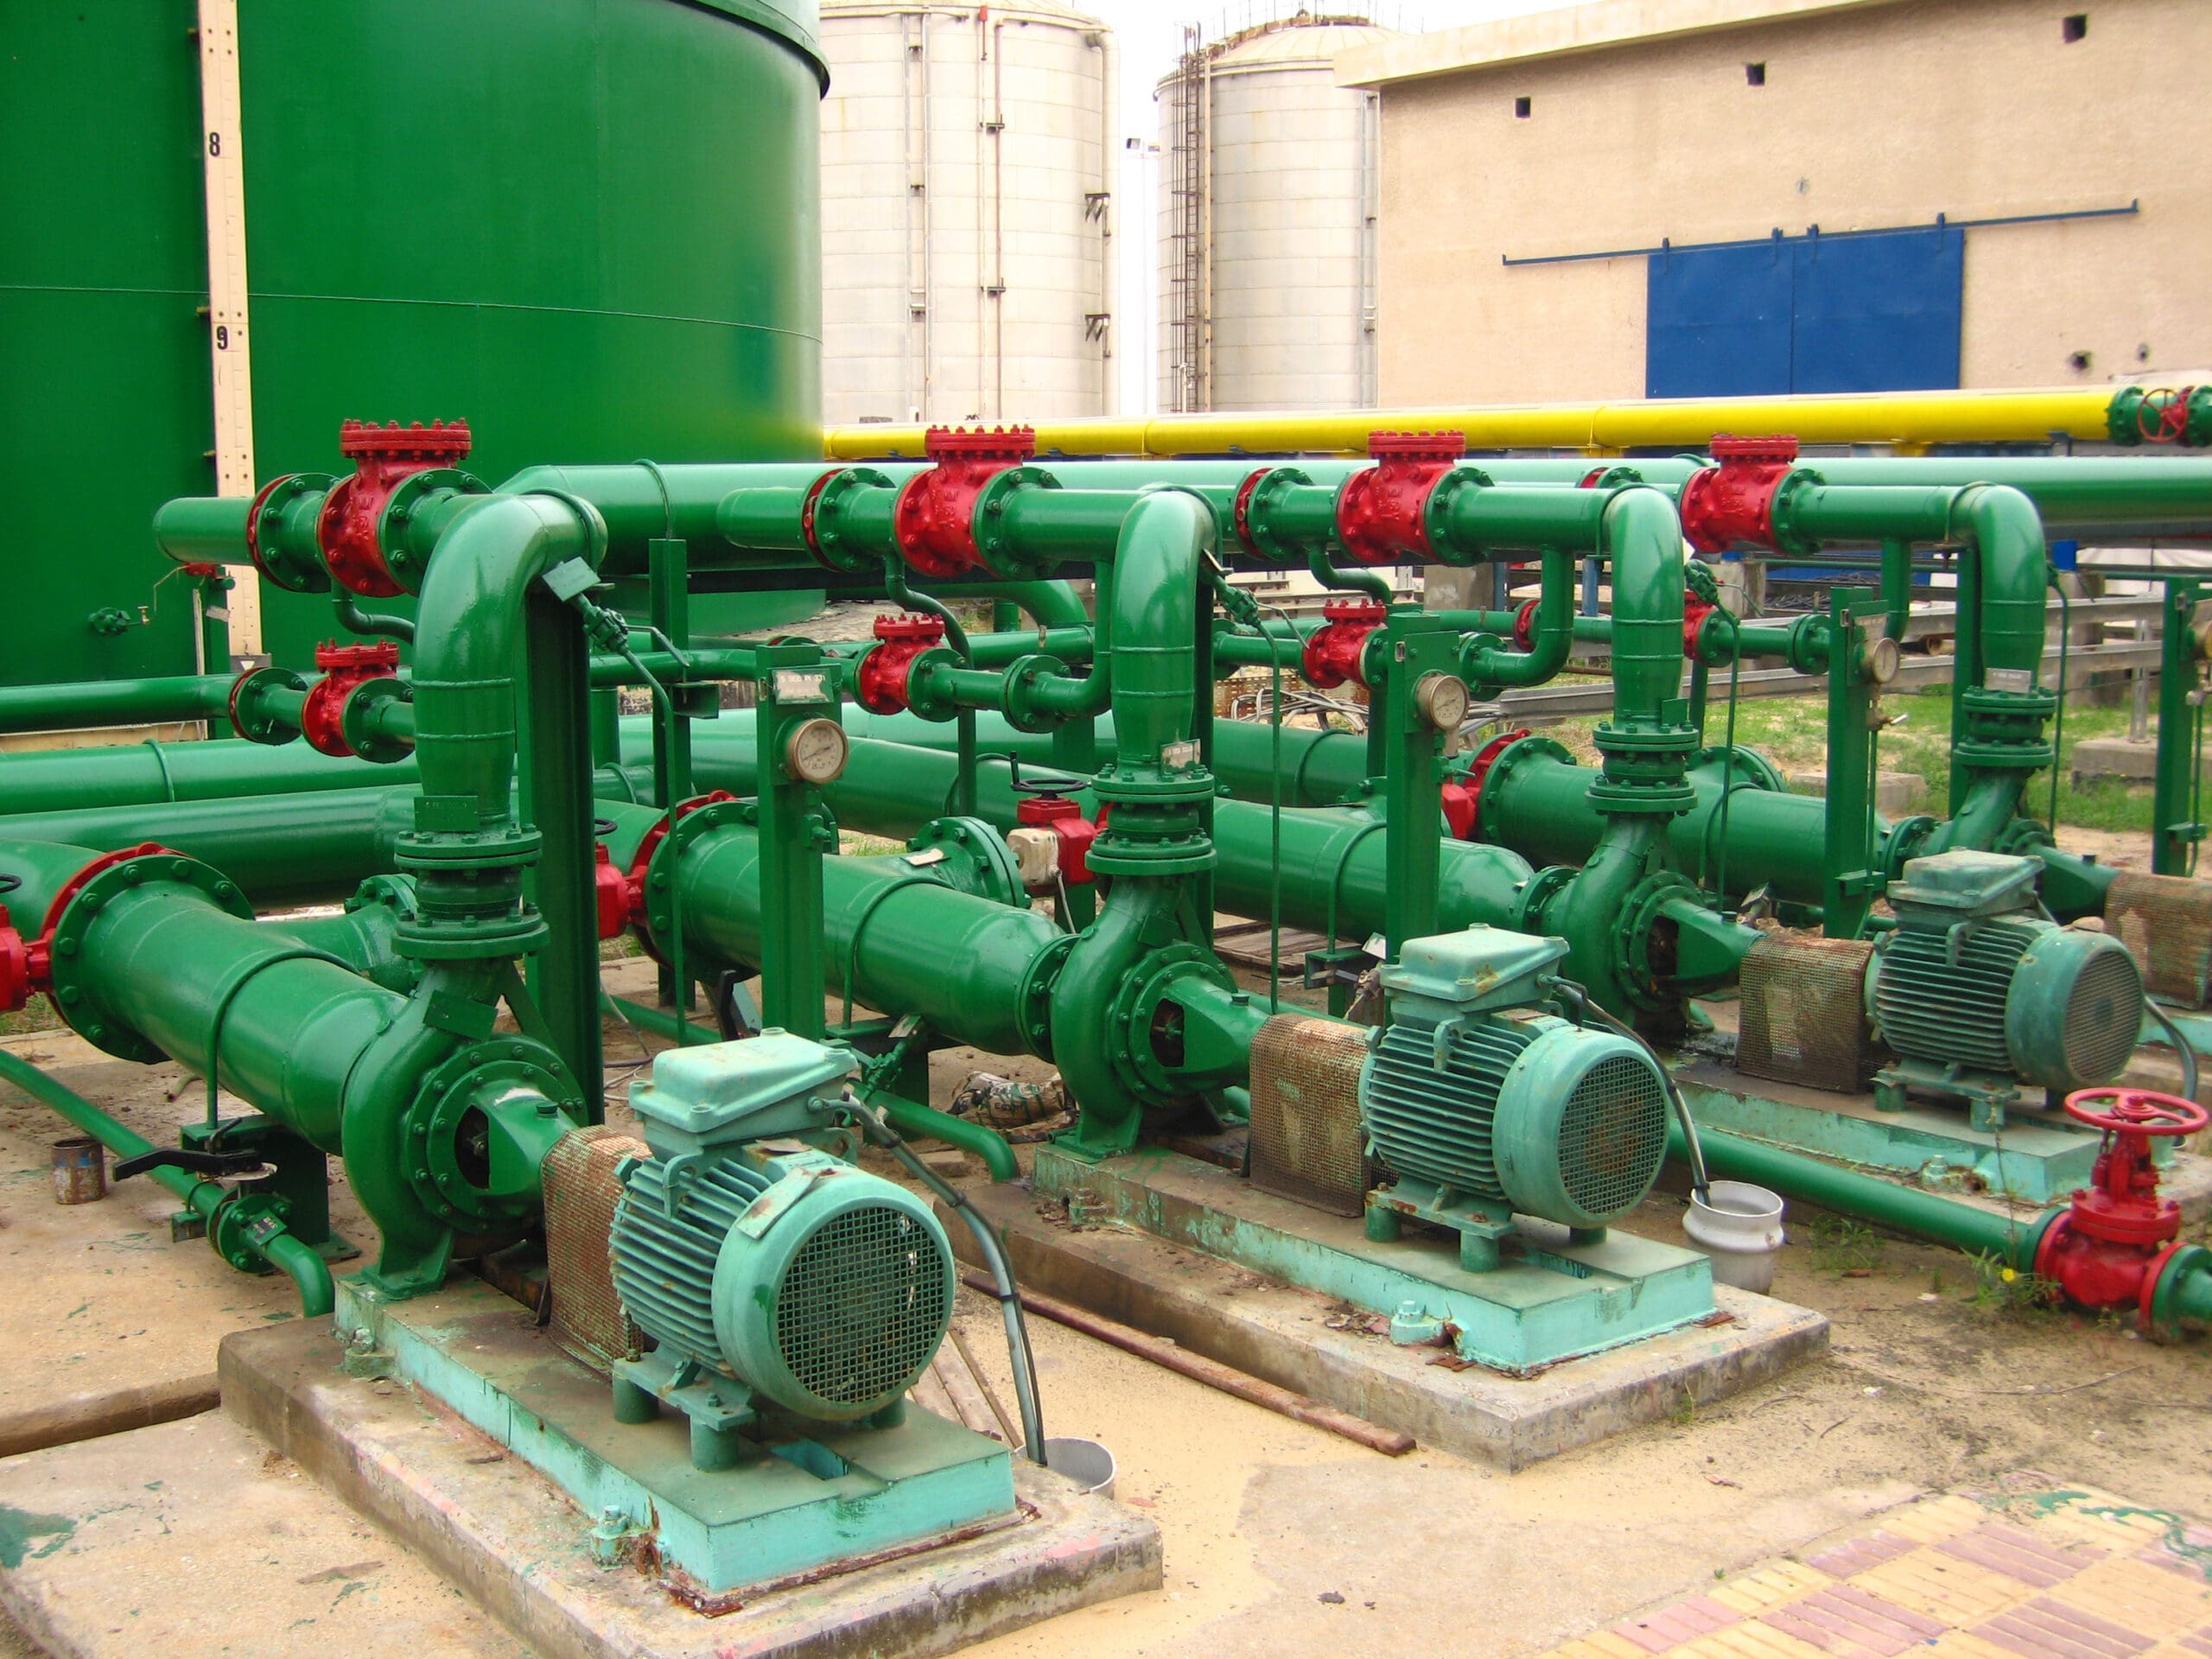 Green pipes and pumps